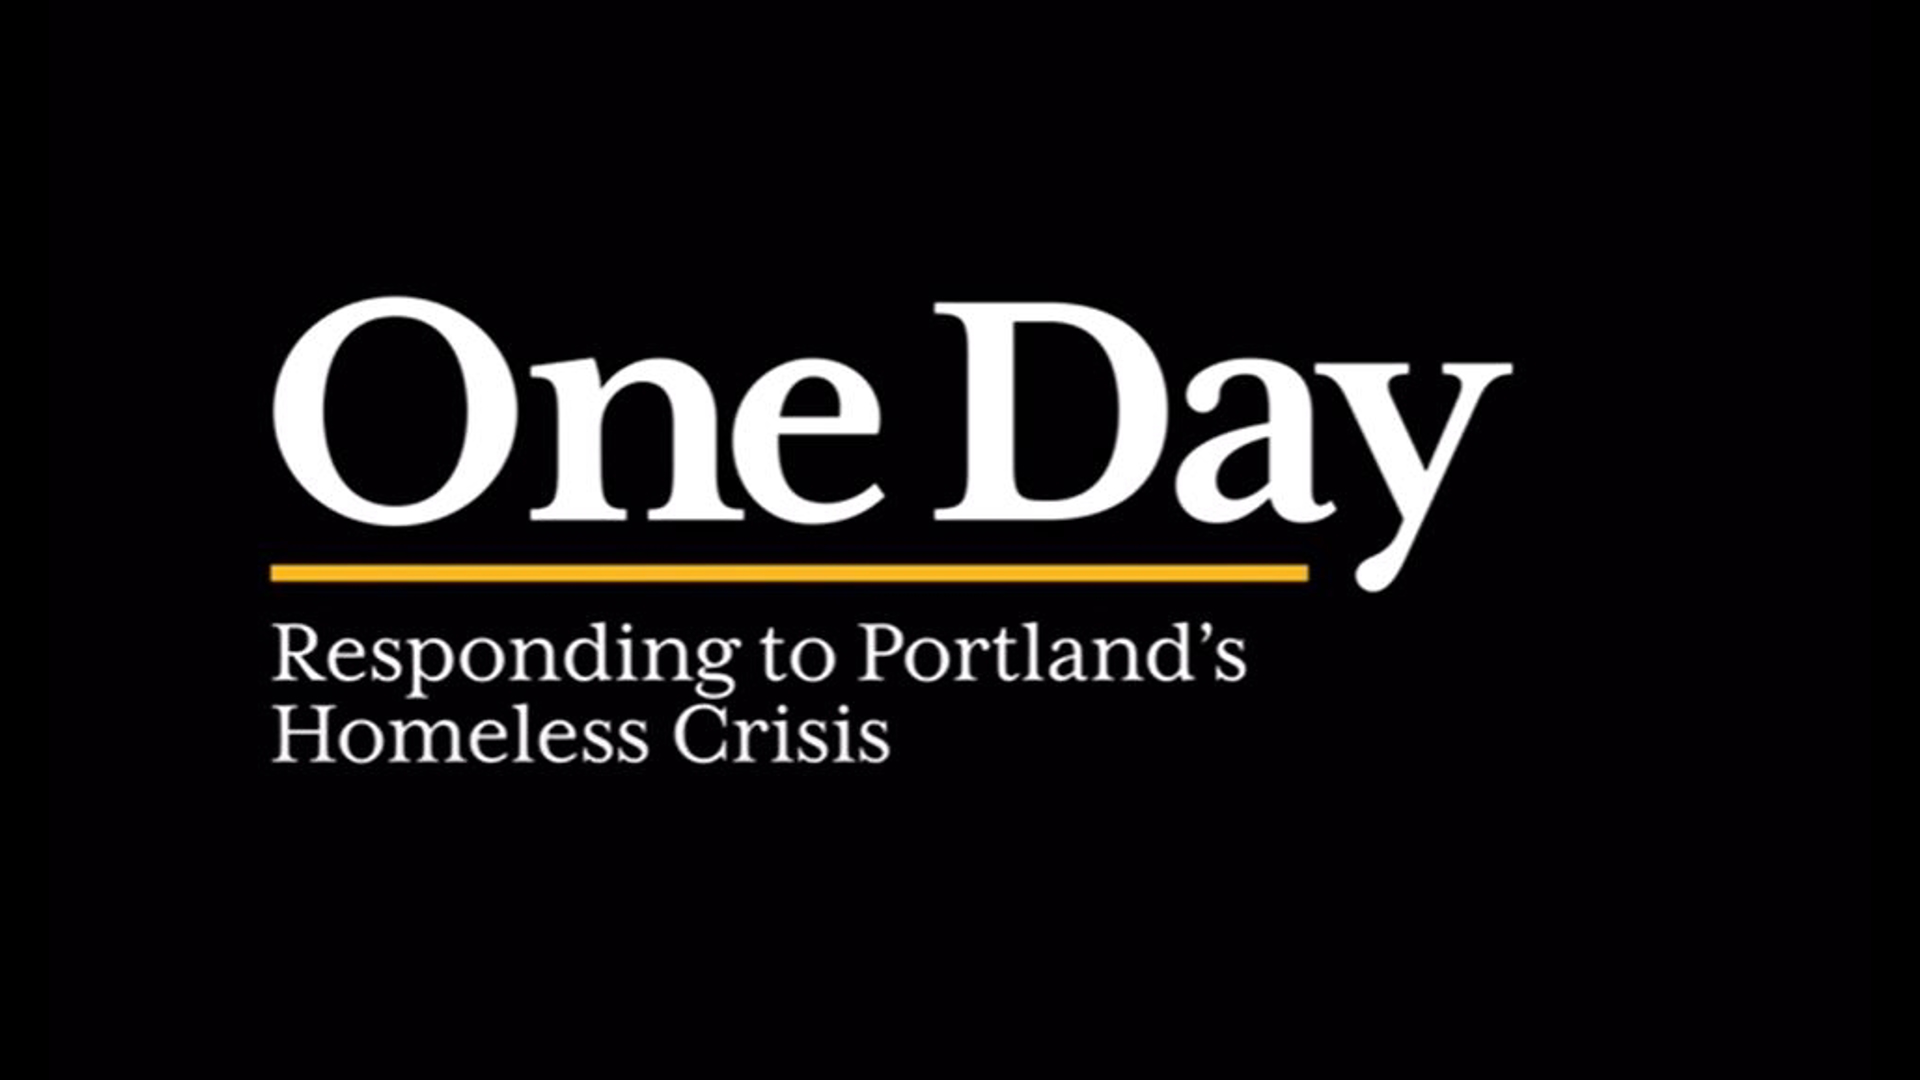 The KGW documentary “One Day” features 14 unique perspectives of Portland’s homeless crisis filmed over a single day in April.